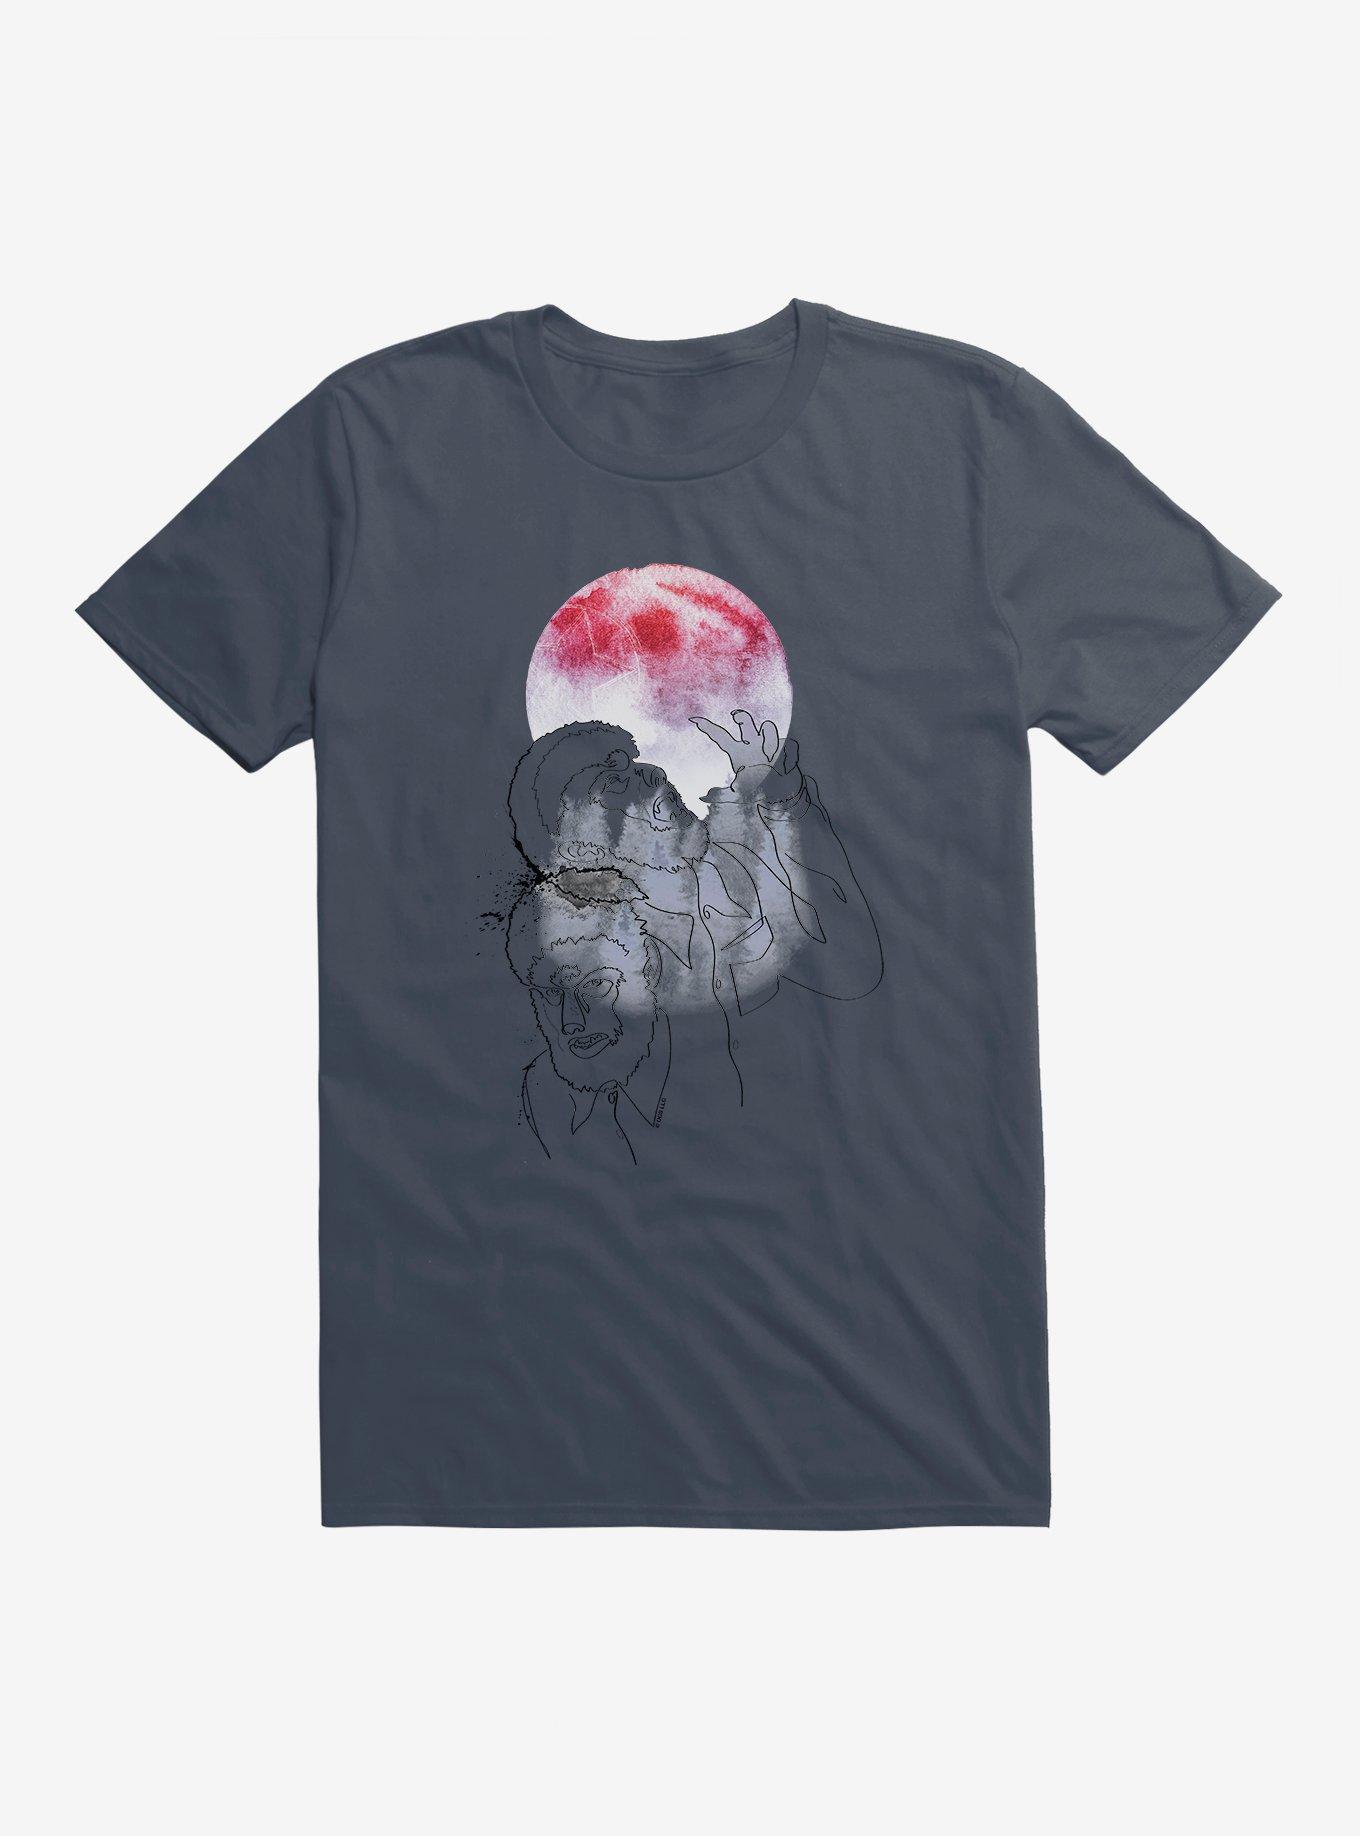 Universal Monsters The Wolf Man Under Full Moon Watercolor T-Shirt